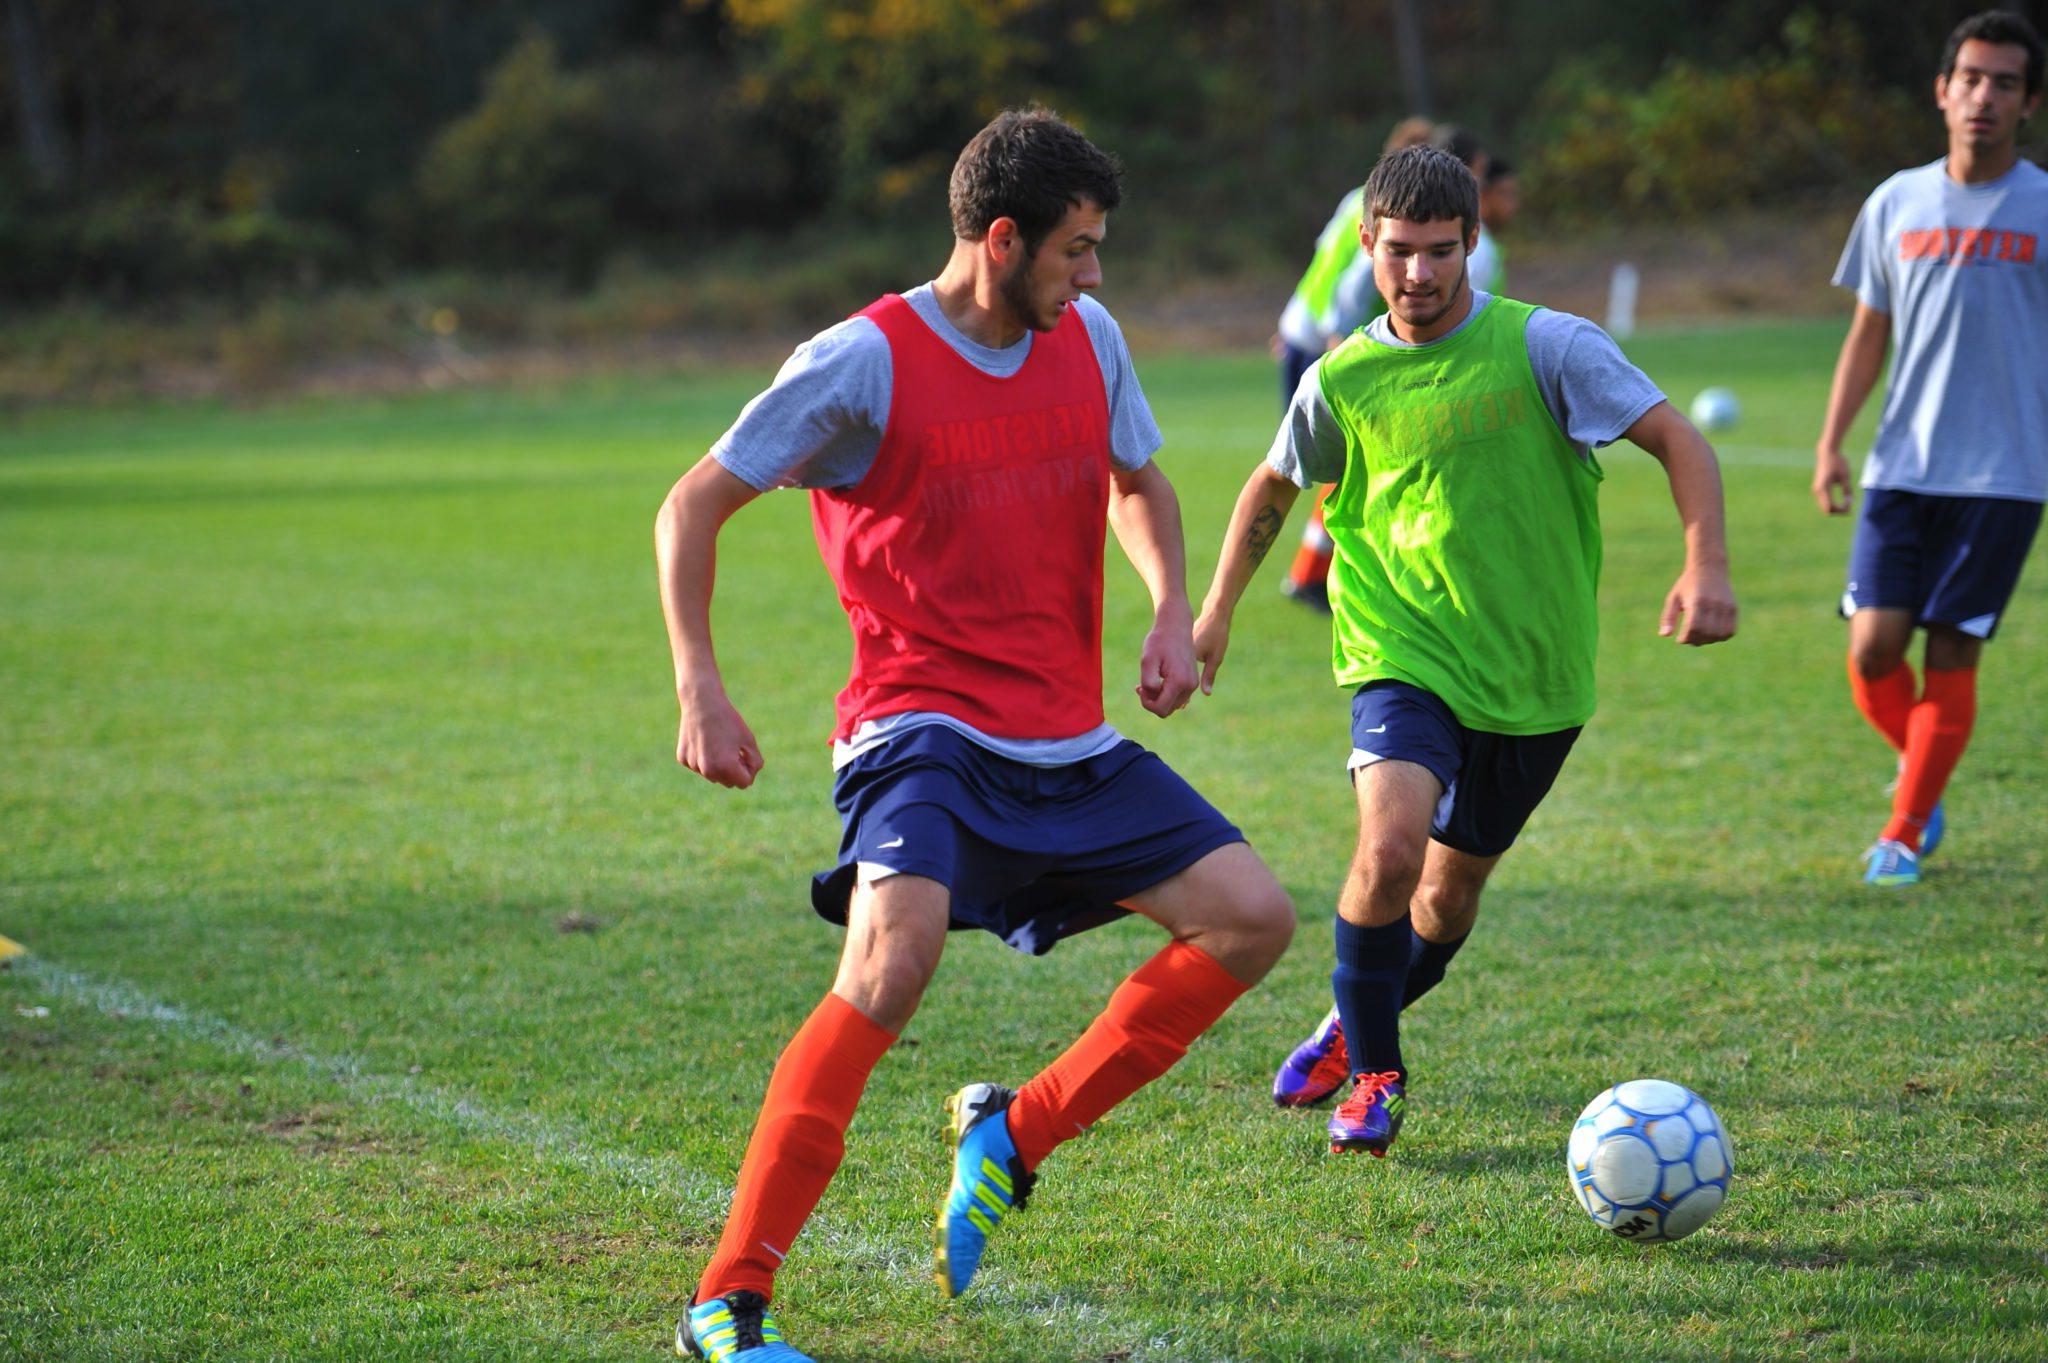 Male athletes play intramural soccer